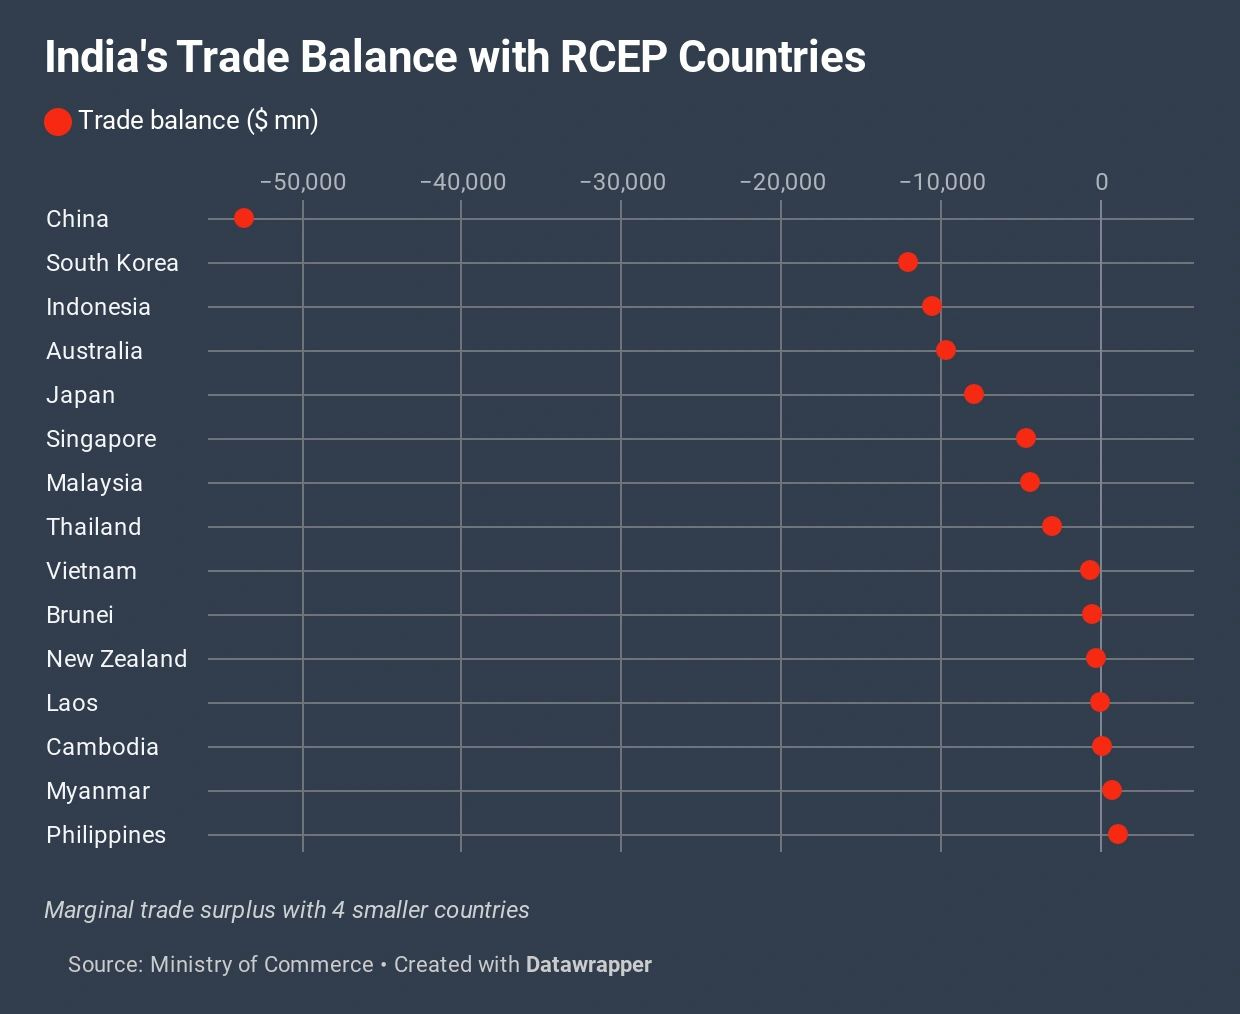 India's trade deficit with RCEP nations